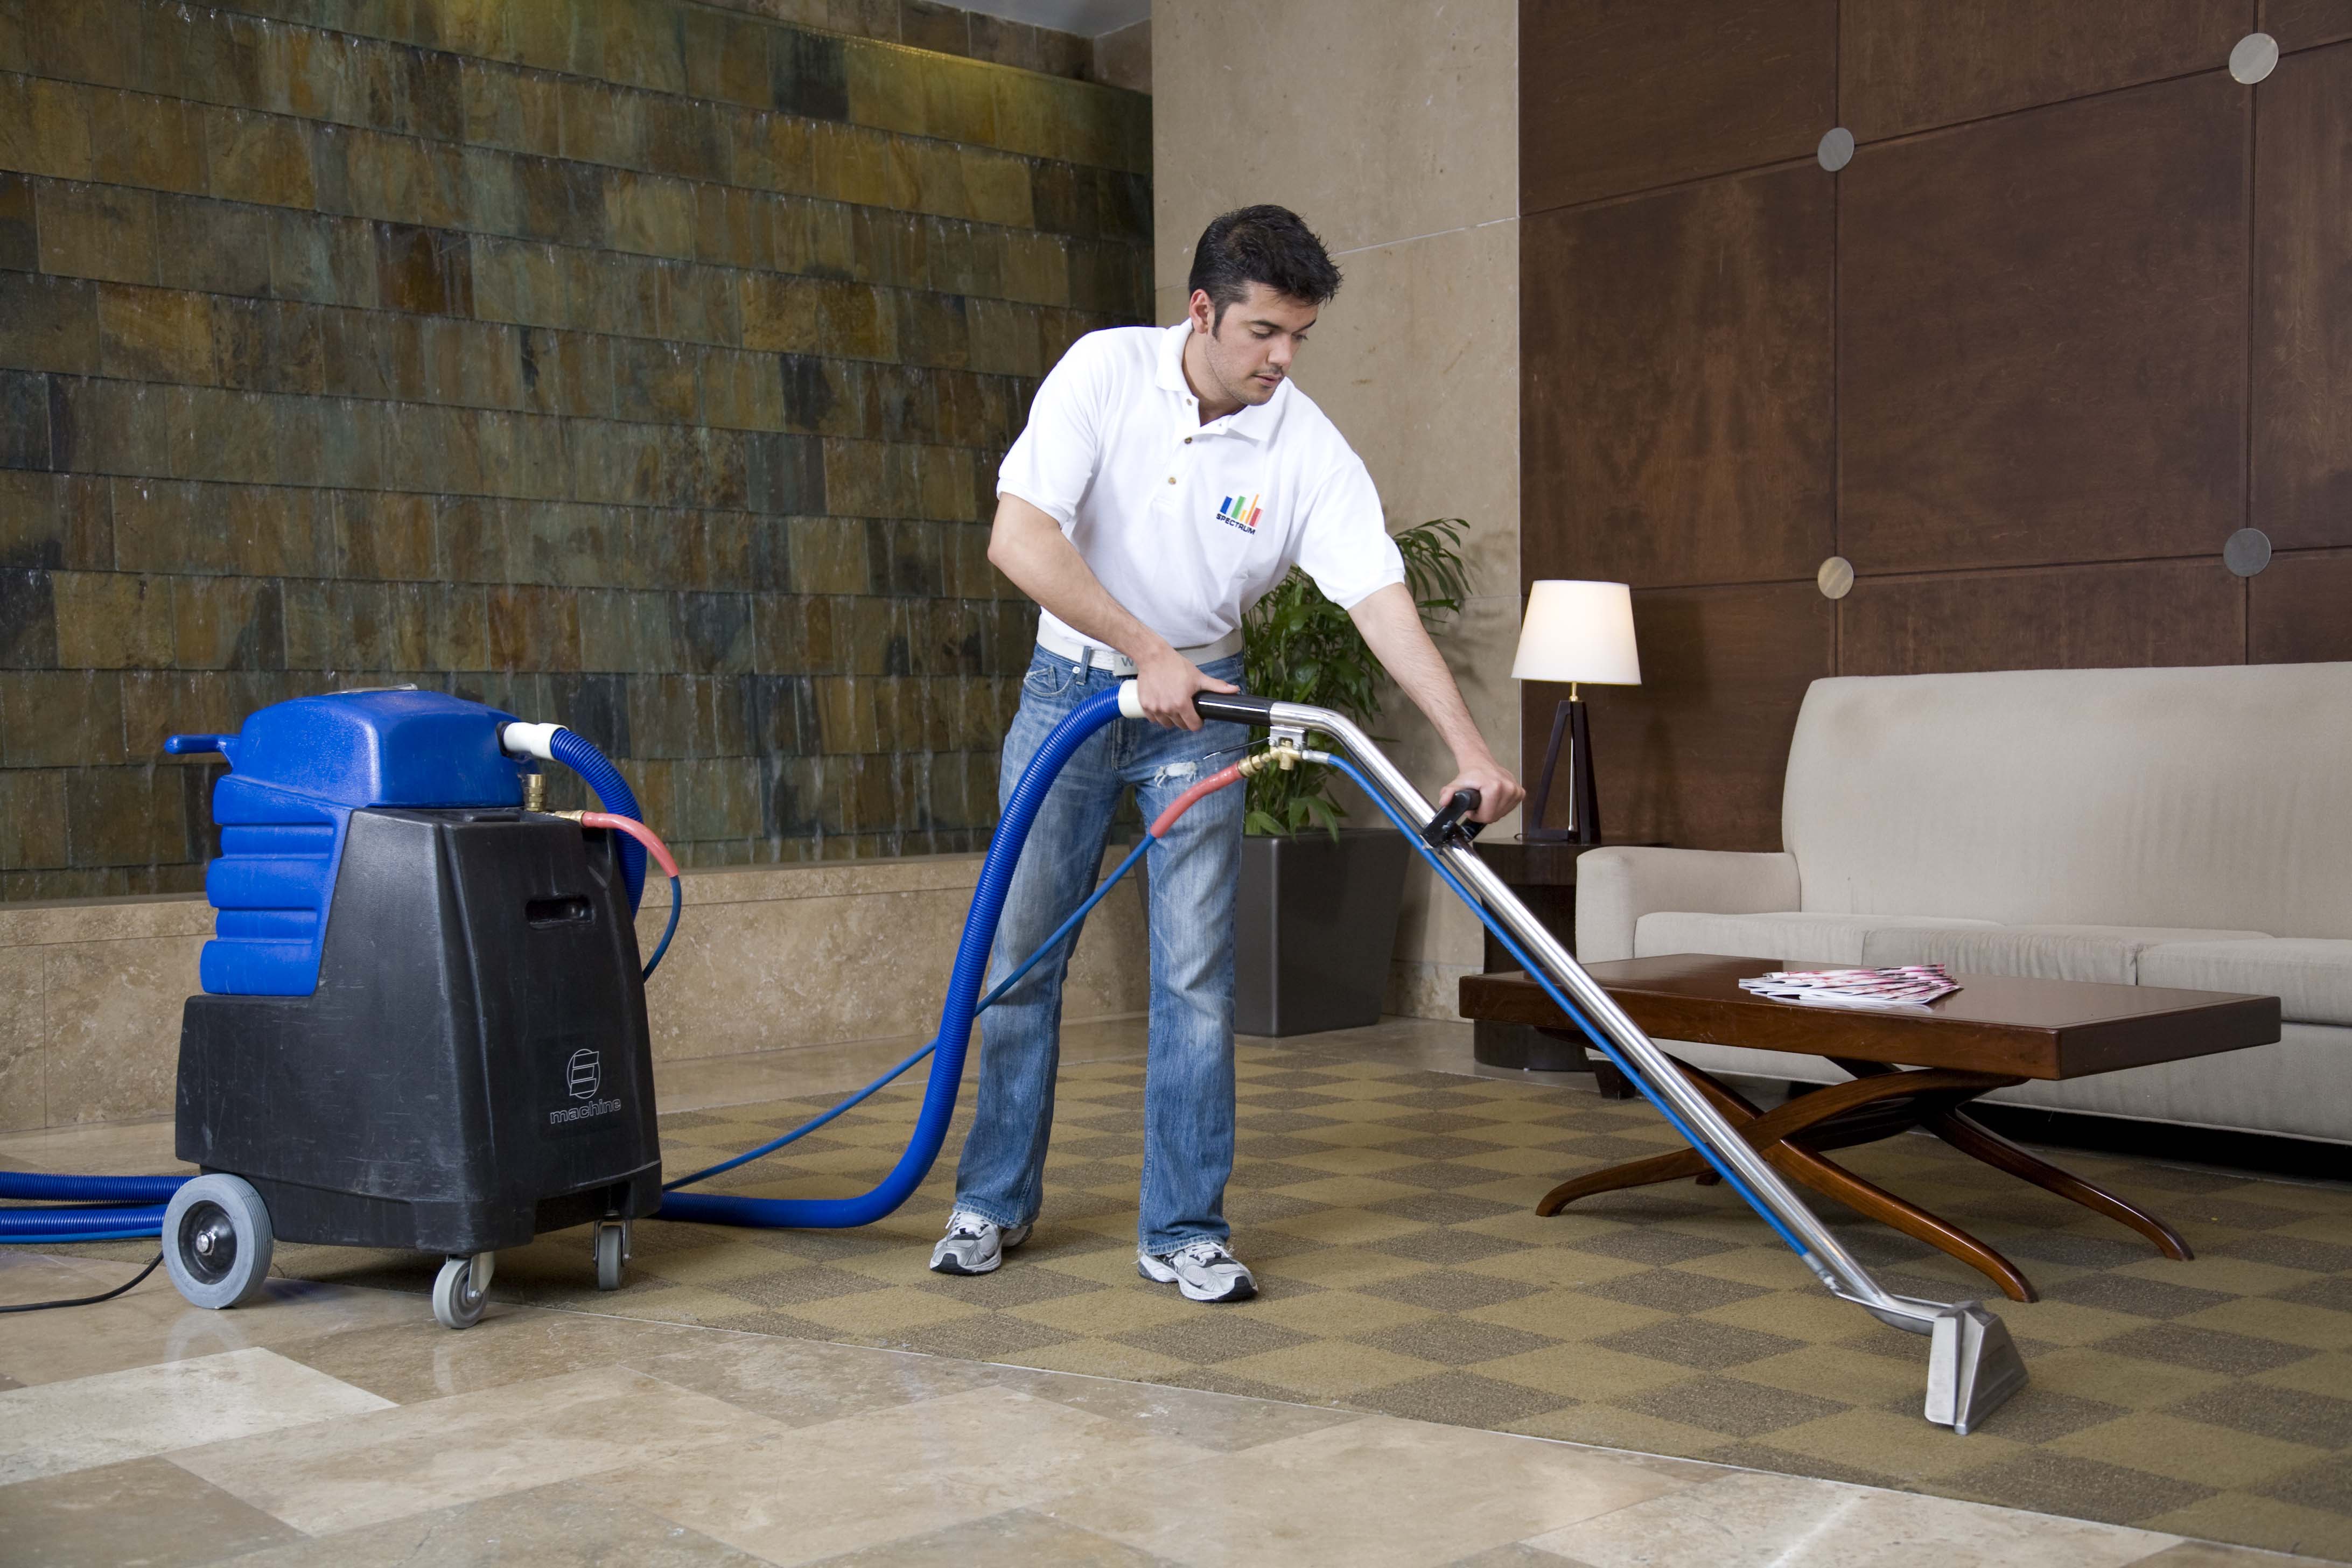 Top Tips For Carpet Cleaning Services